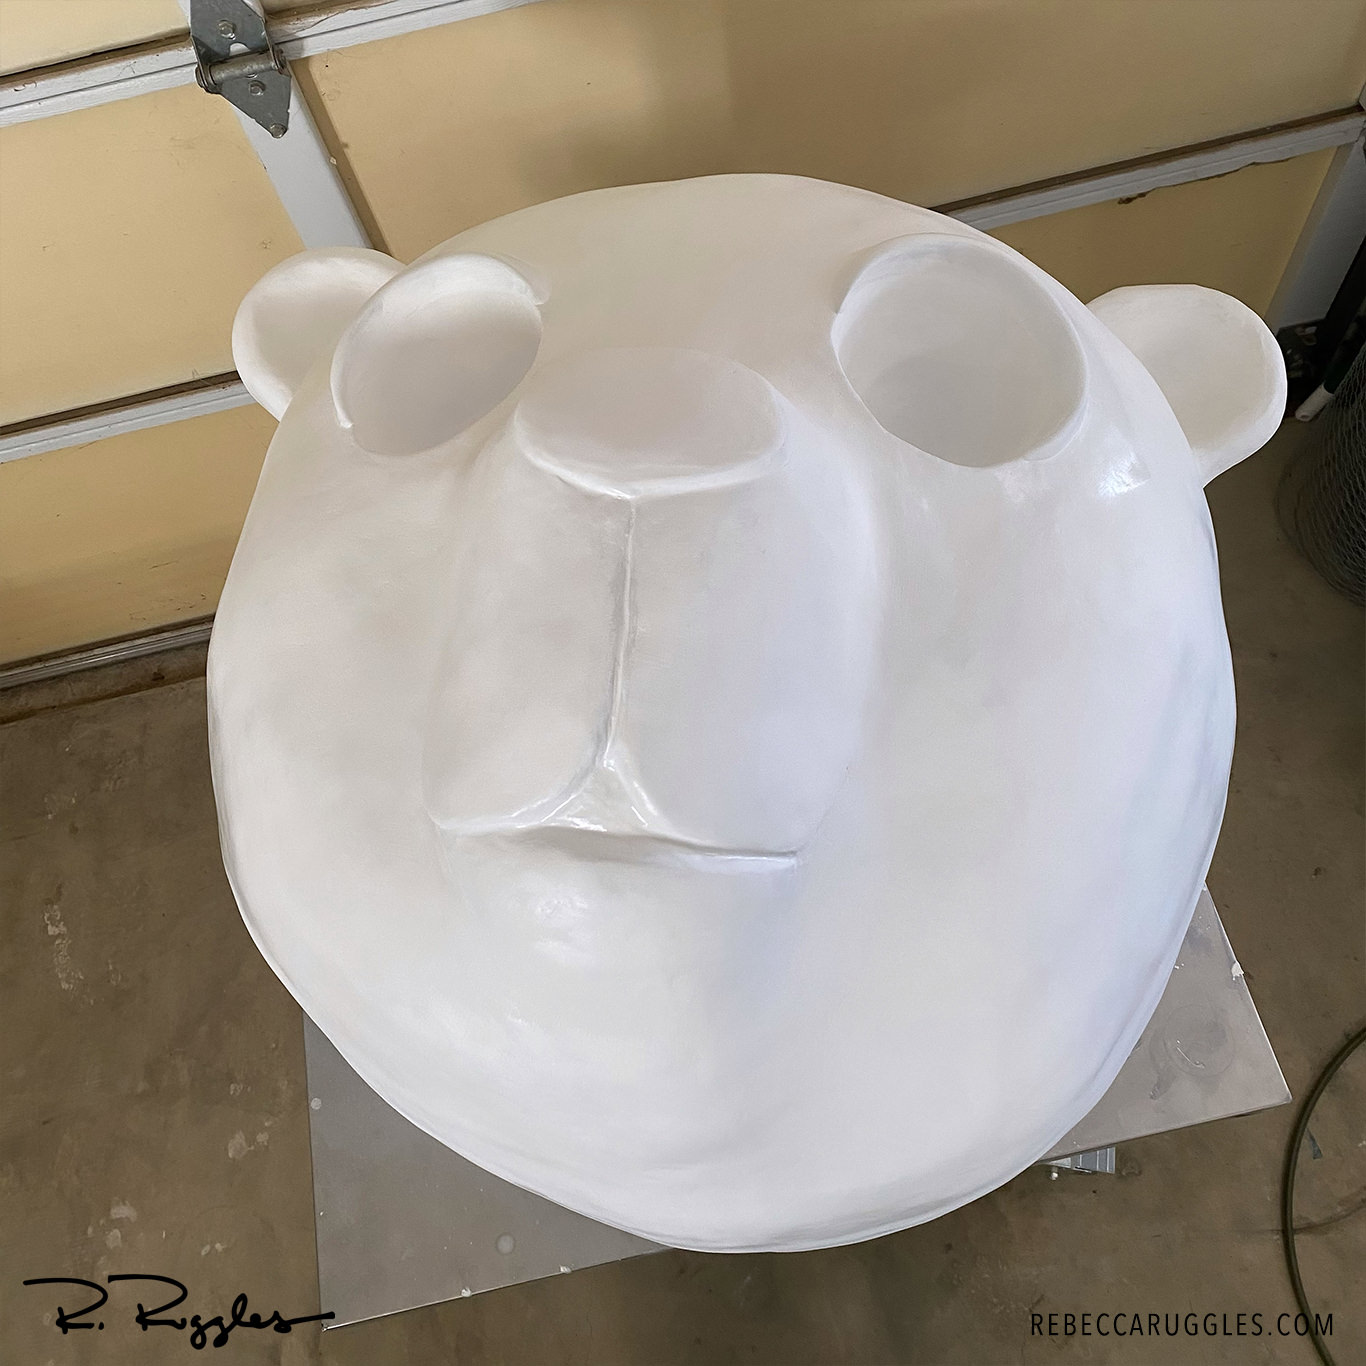 Panda head sculpture sanded and primed with gesso for paint.